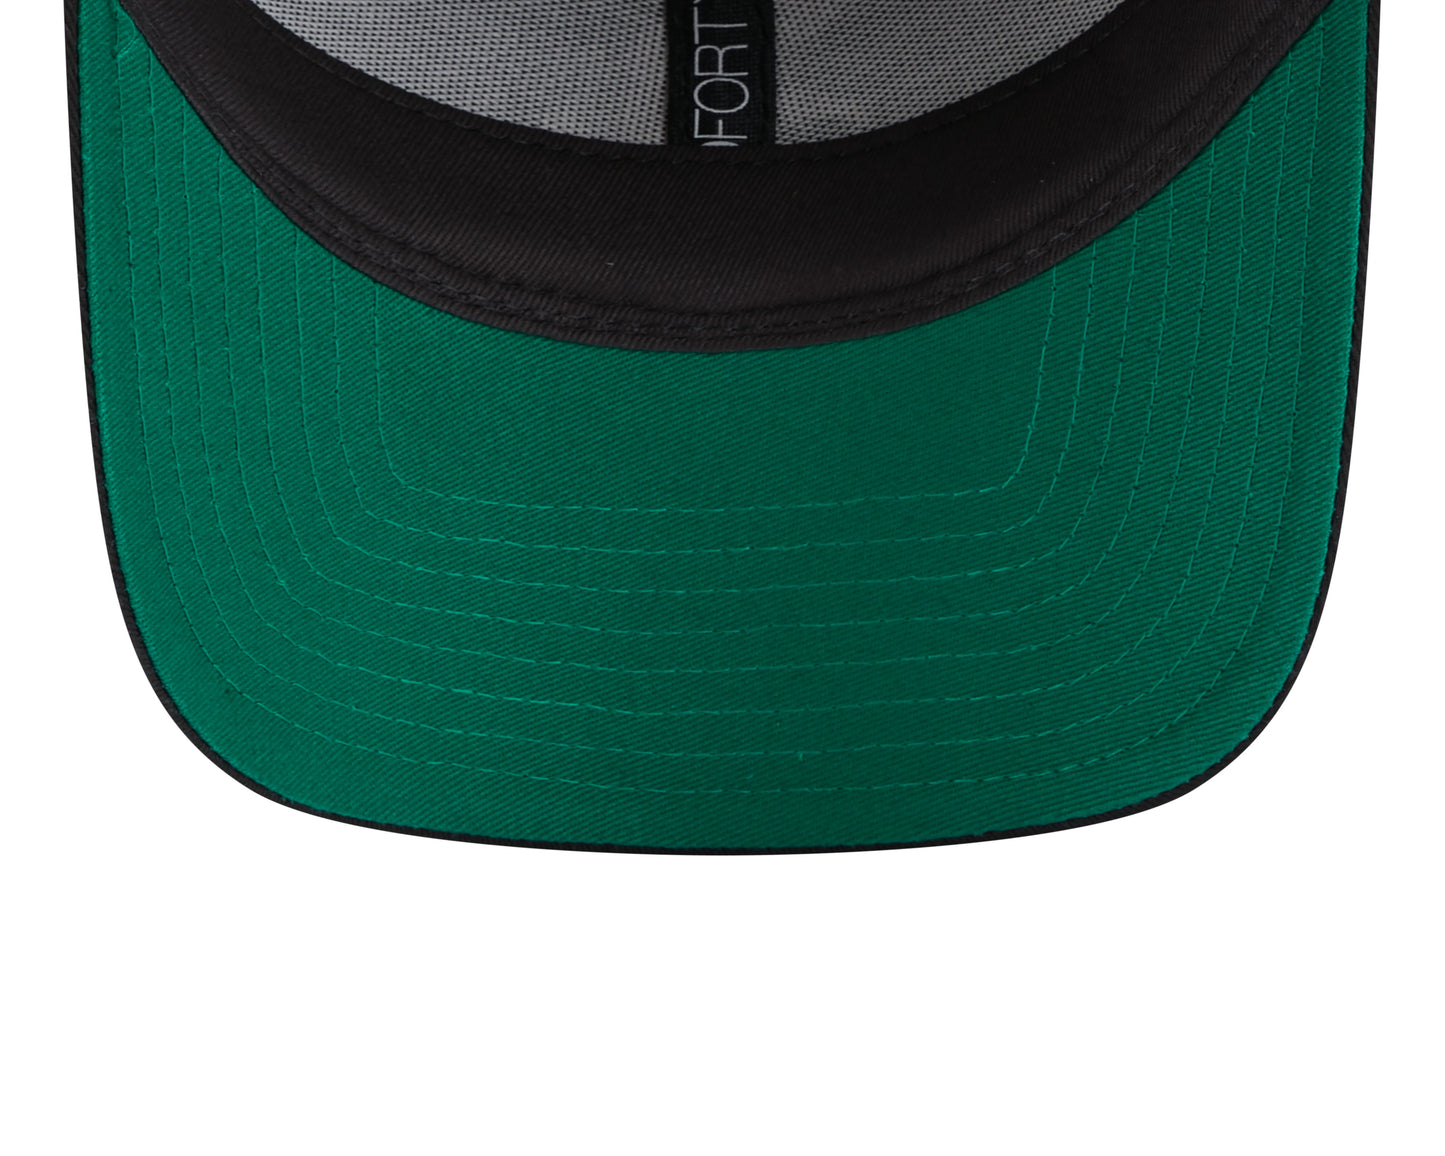 NEW ERA 9FORTY CHICAGO WHITE SOX TEAM SIDE PATCH BLACK / KELLY GREEN CAP